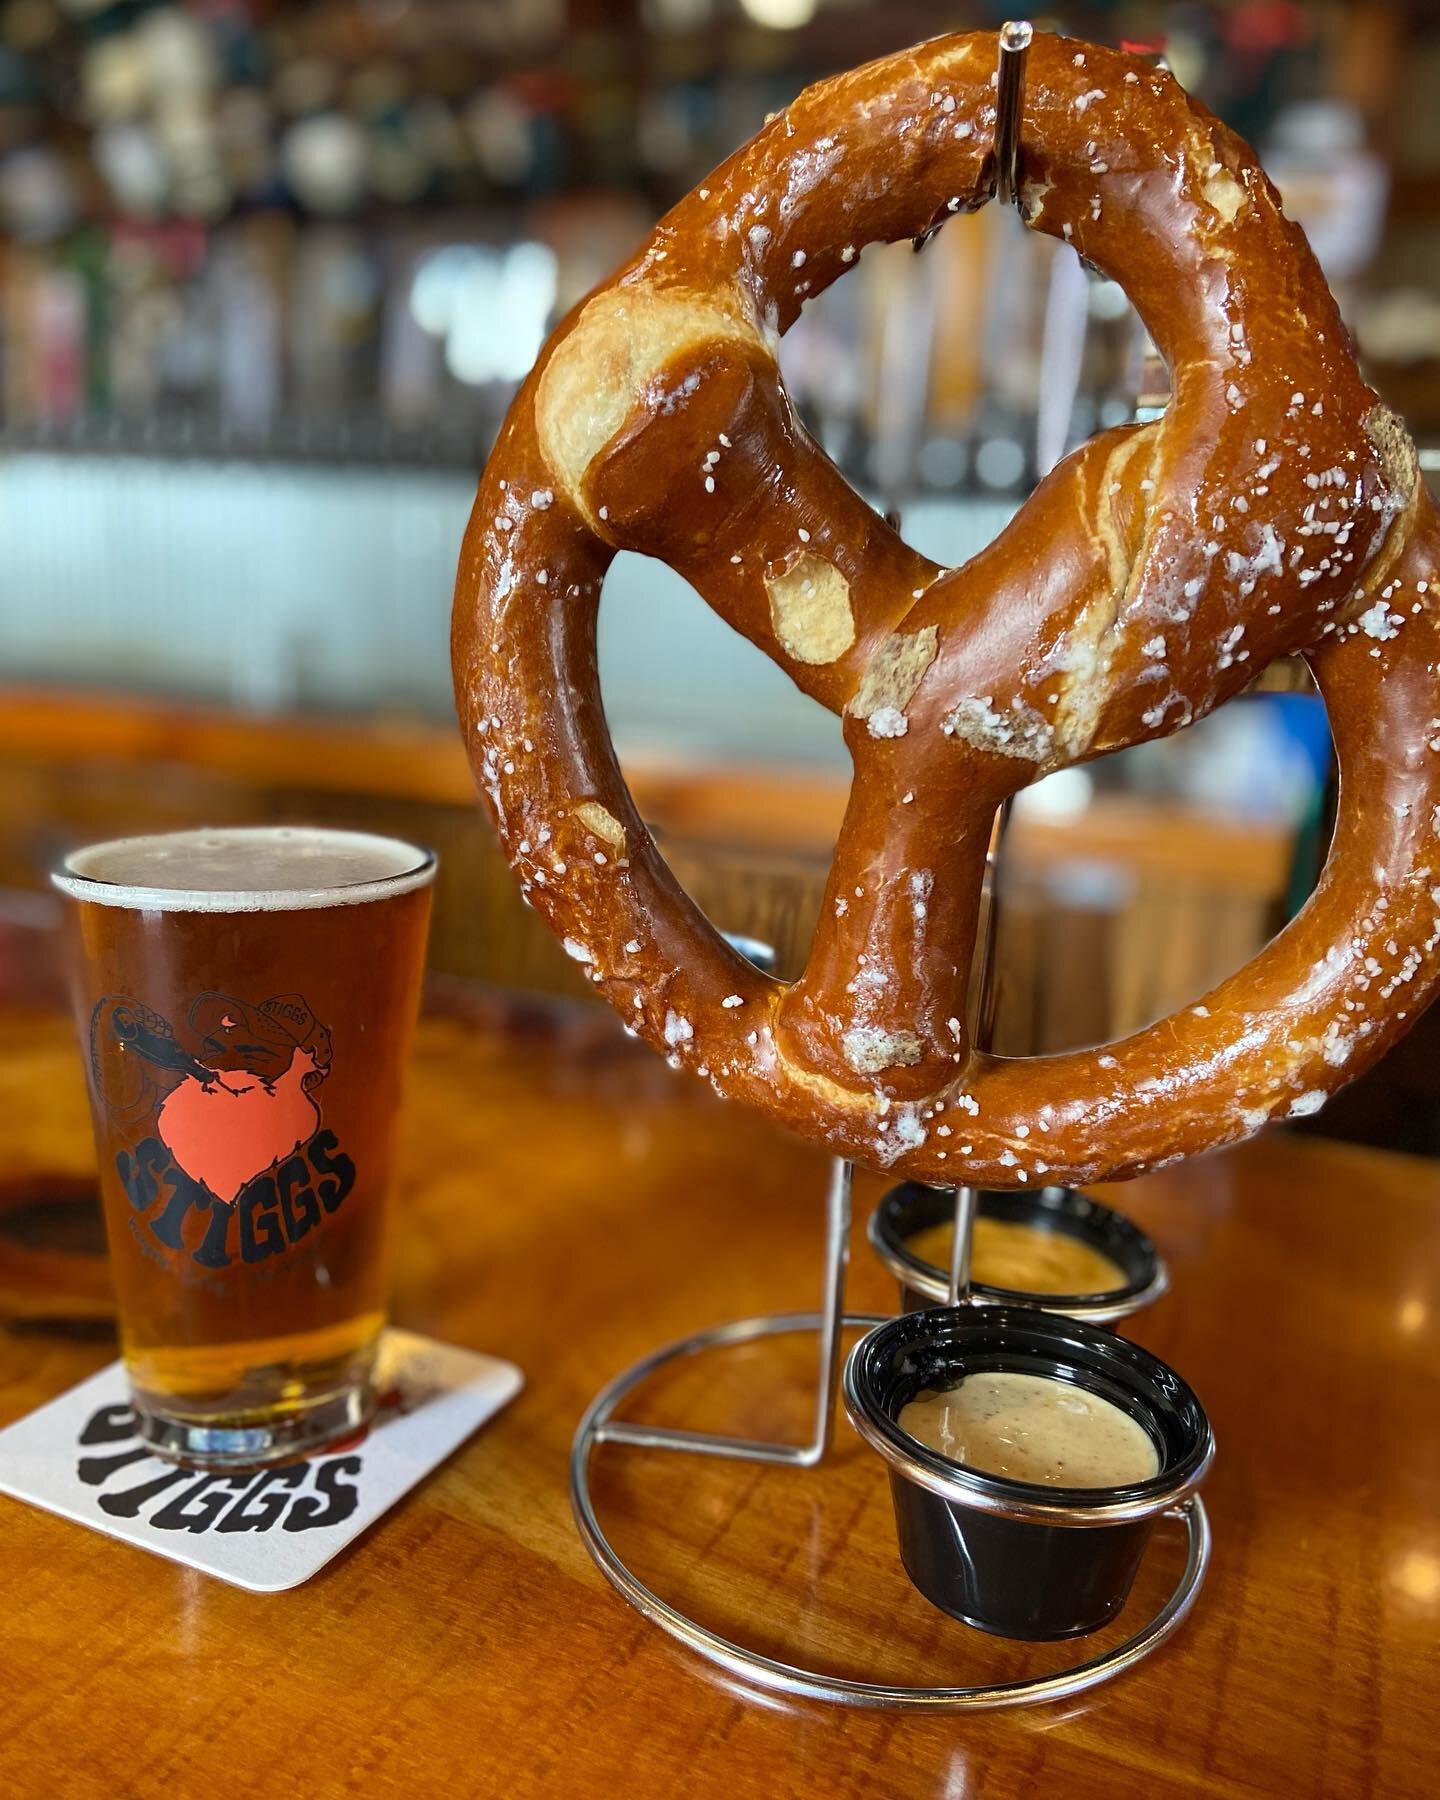 Sunday vibes.  Craft 🍺❤️ &amp; Bavarian pretzels 🥨 😍! 

See you in the #taproom @stiggsbrewery 

#craftbeer #craftbeerlife #craftbeerlover #michiganbeer #stiggs #stiggsbeer #ontap #beerme #beer #beerlife #beerlover #brewery #microbrewery #michigan